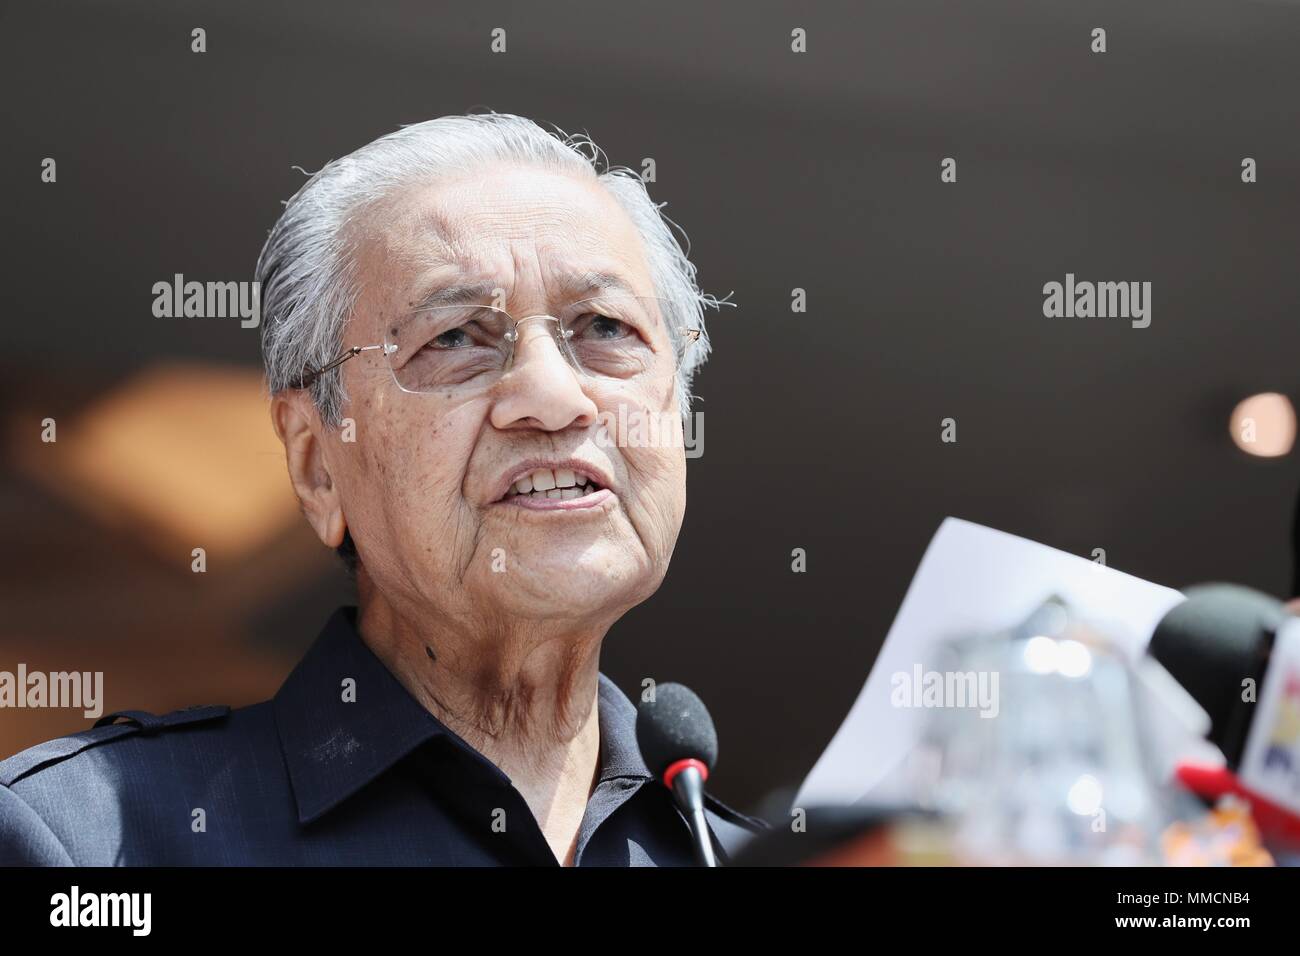 (180511) -- KUALA LUMPUR, May 11, 2018 (Xinhua) -- Malaysian new Prime Minister Mahathir Mohamad speaks at a press conferenec in Kuala Lumpur May 11, 2018. Mahathir Mohamad on Friday named 10 ministries whose ministers need to be appointed immediately, the first step for him and his Pakatan Harapan coalition to form a cabinet. (Xinhua/Zhu Wei) (yy) Stock Photo